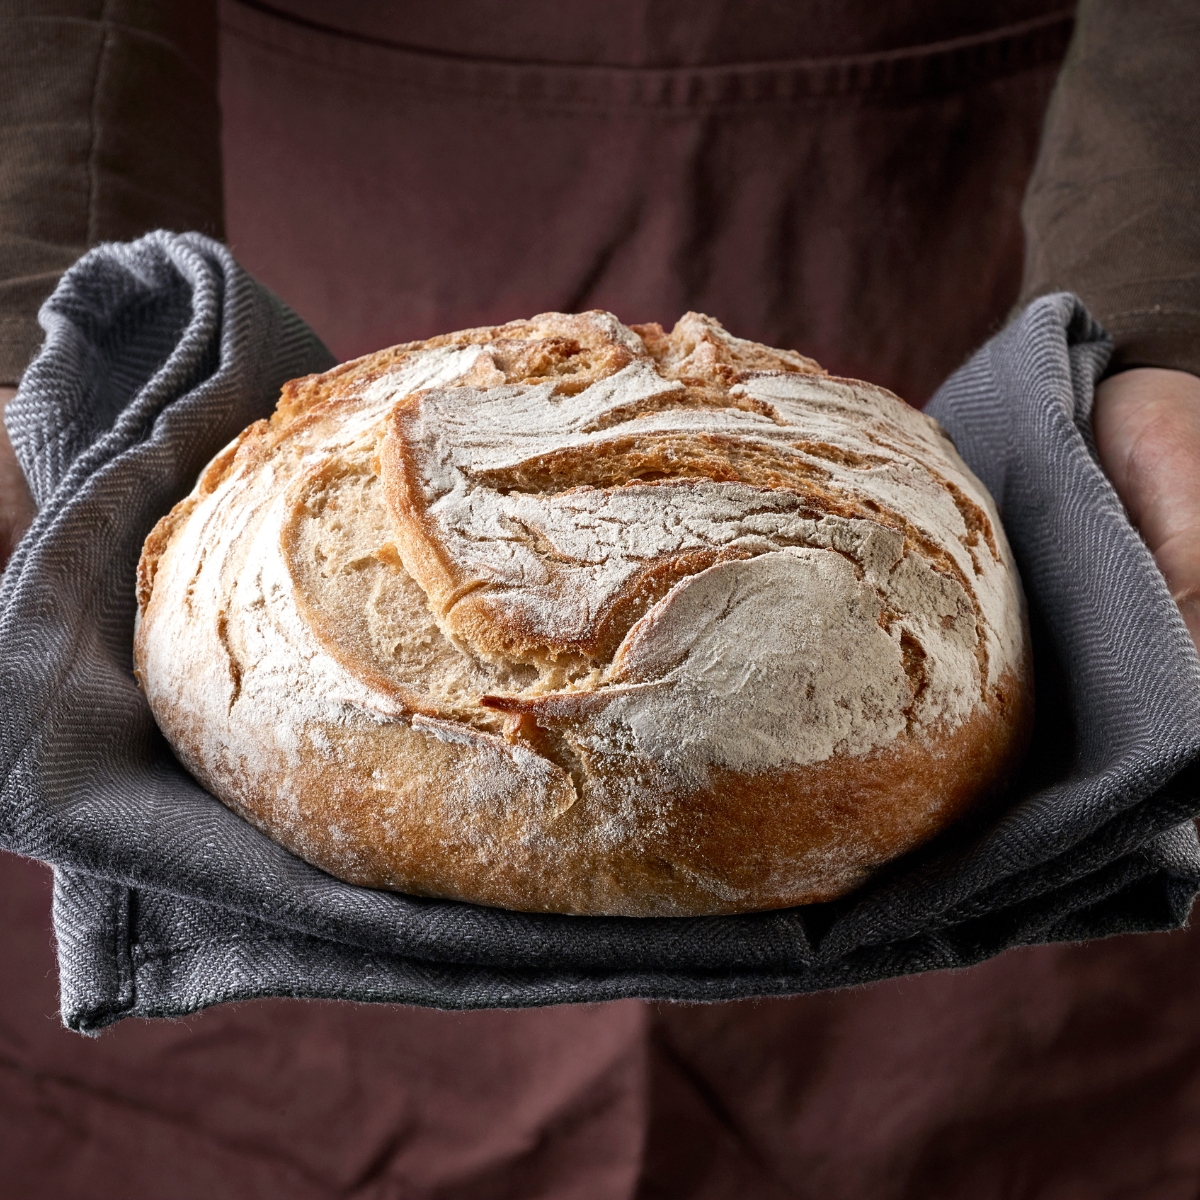 A brown and round loaf of bread being held by hands in a grey tea towel. There is a light dusting of white flour over the bread.